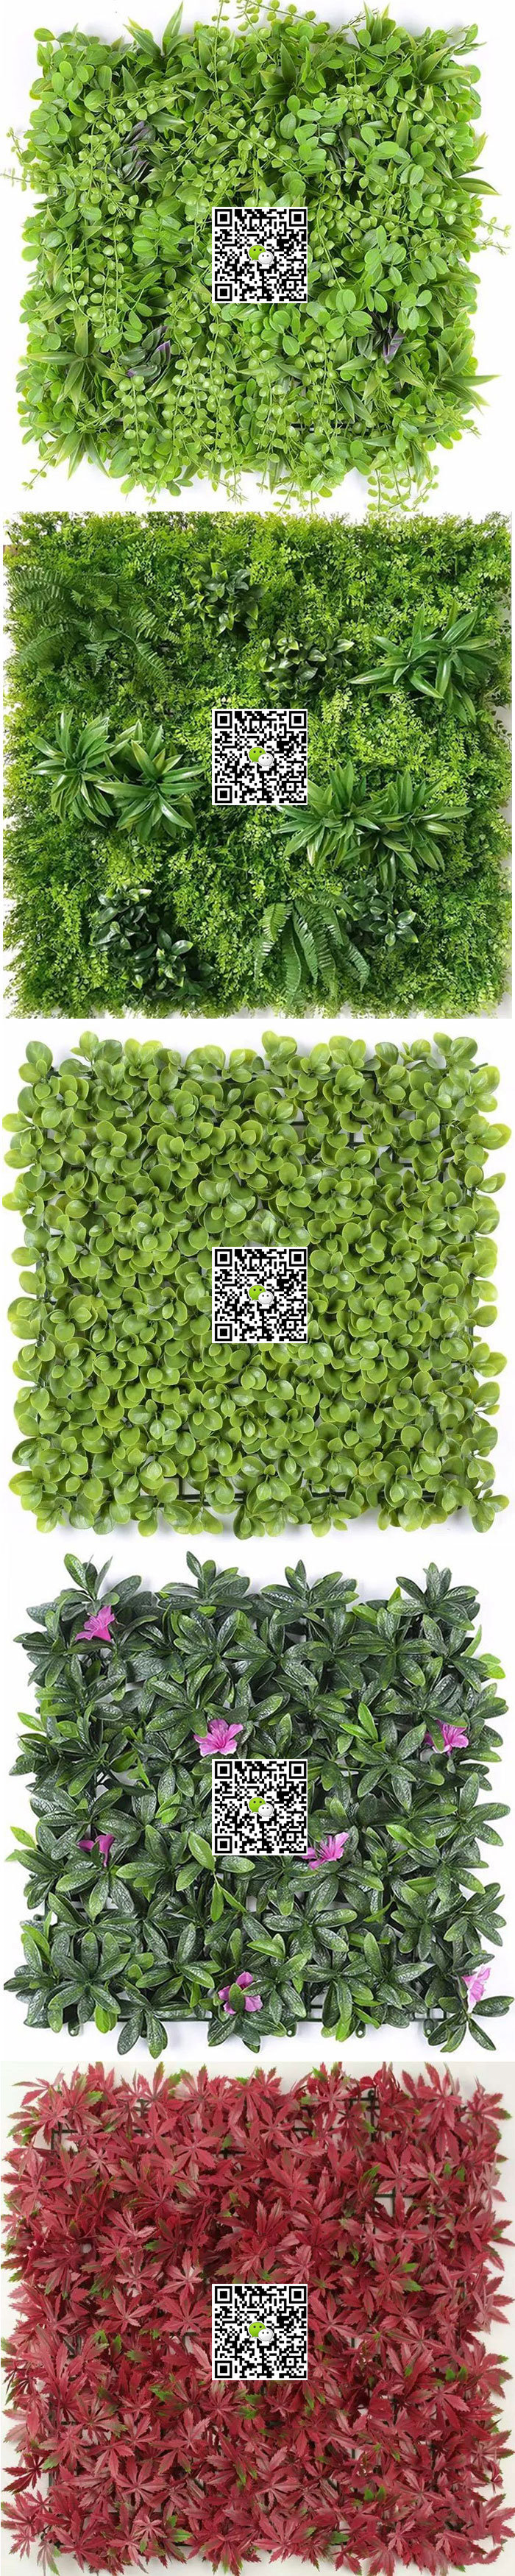 Artificial Boxwood Plastic IVY Fence Green Wall Vertical Garden for Interior Exterior Landscaping